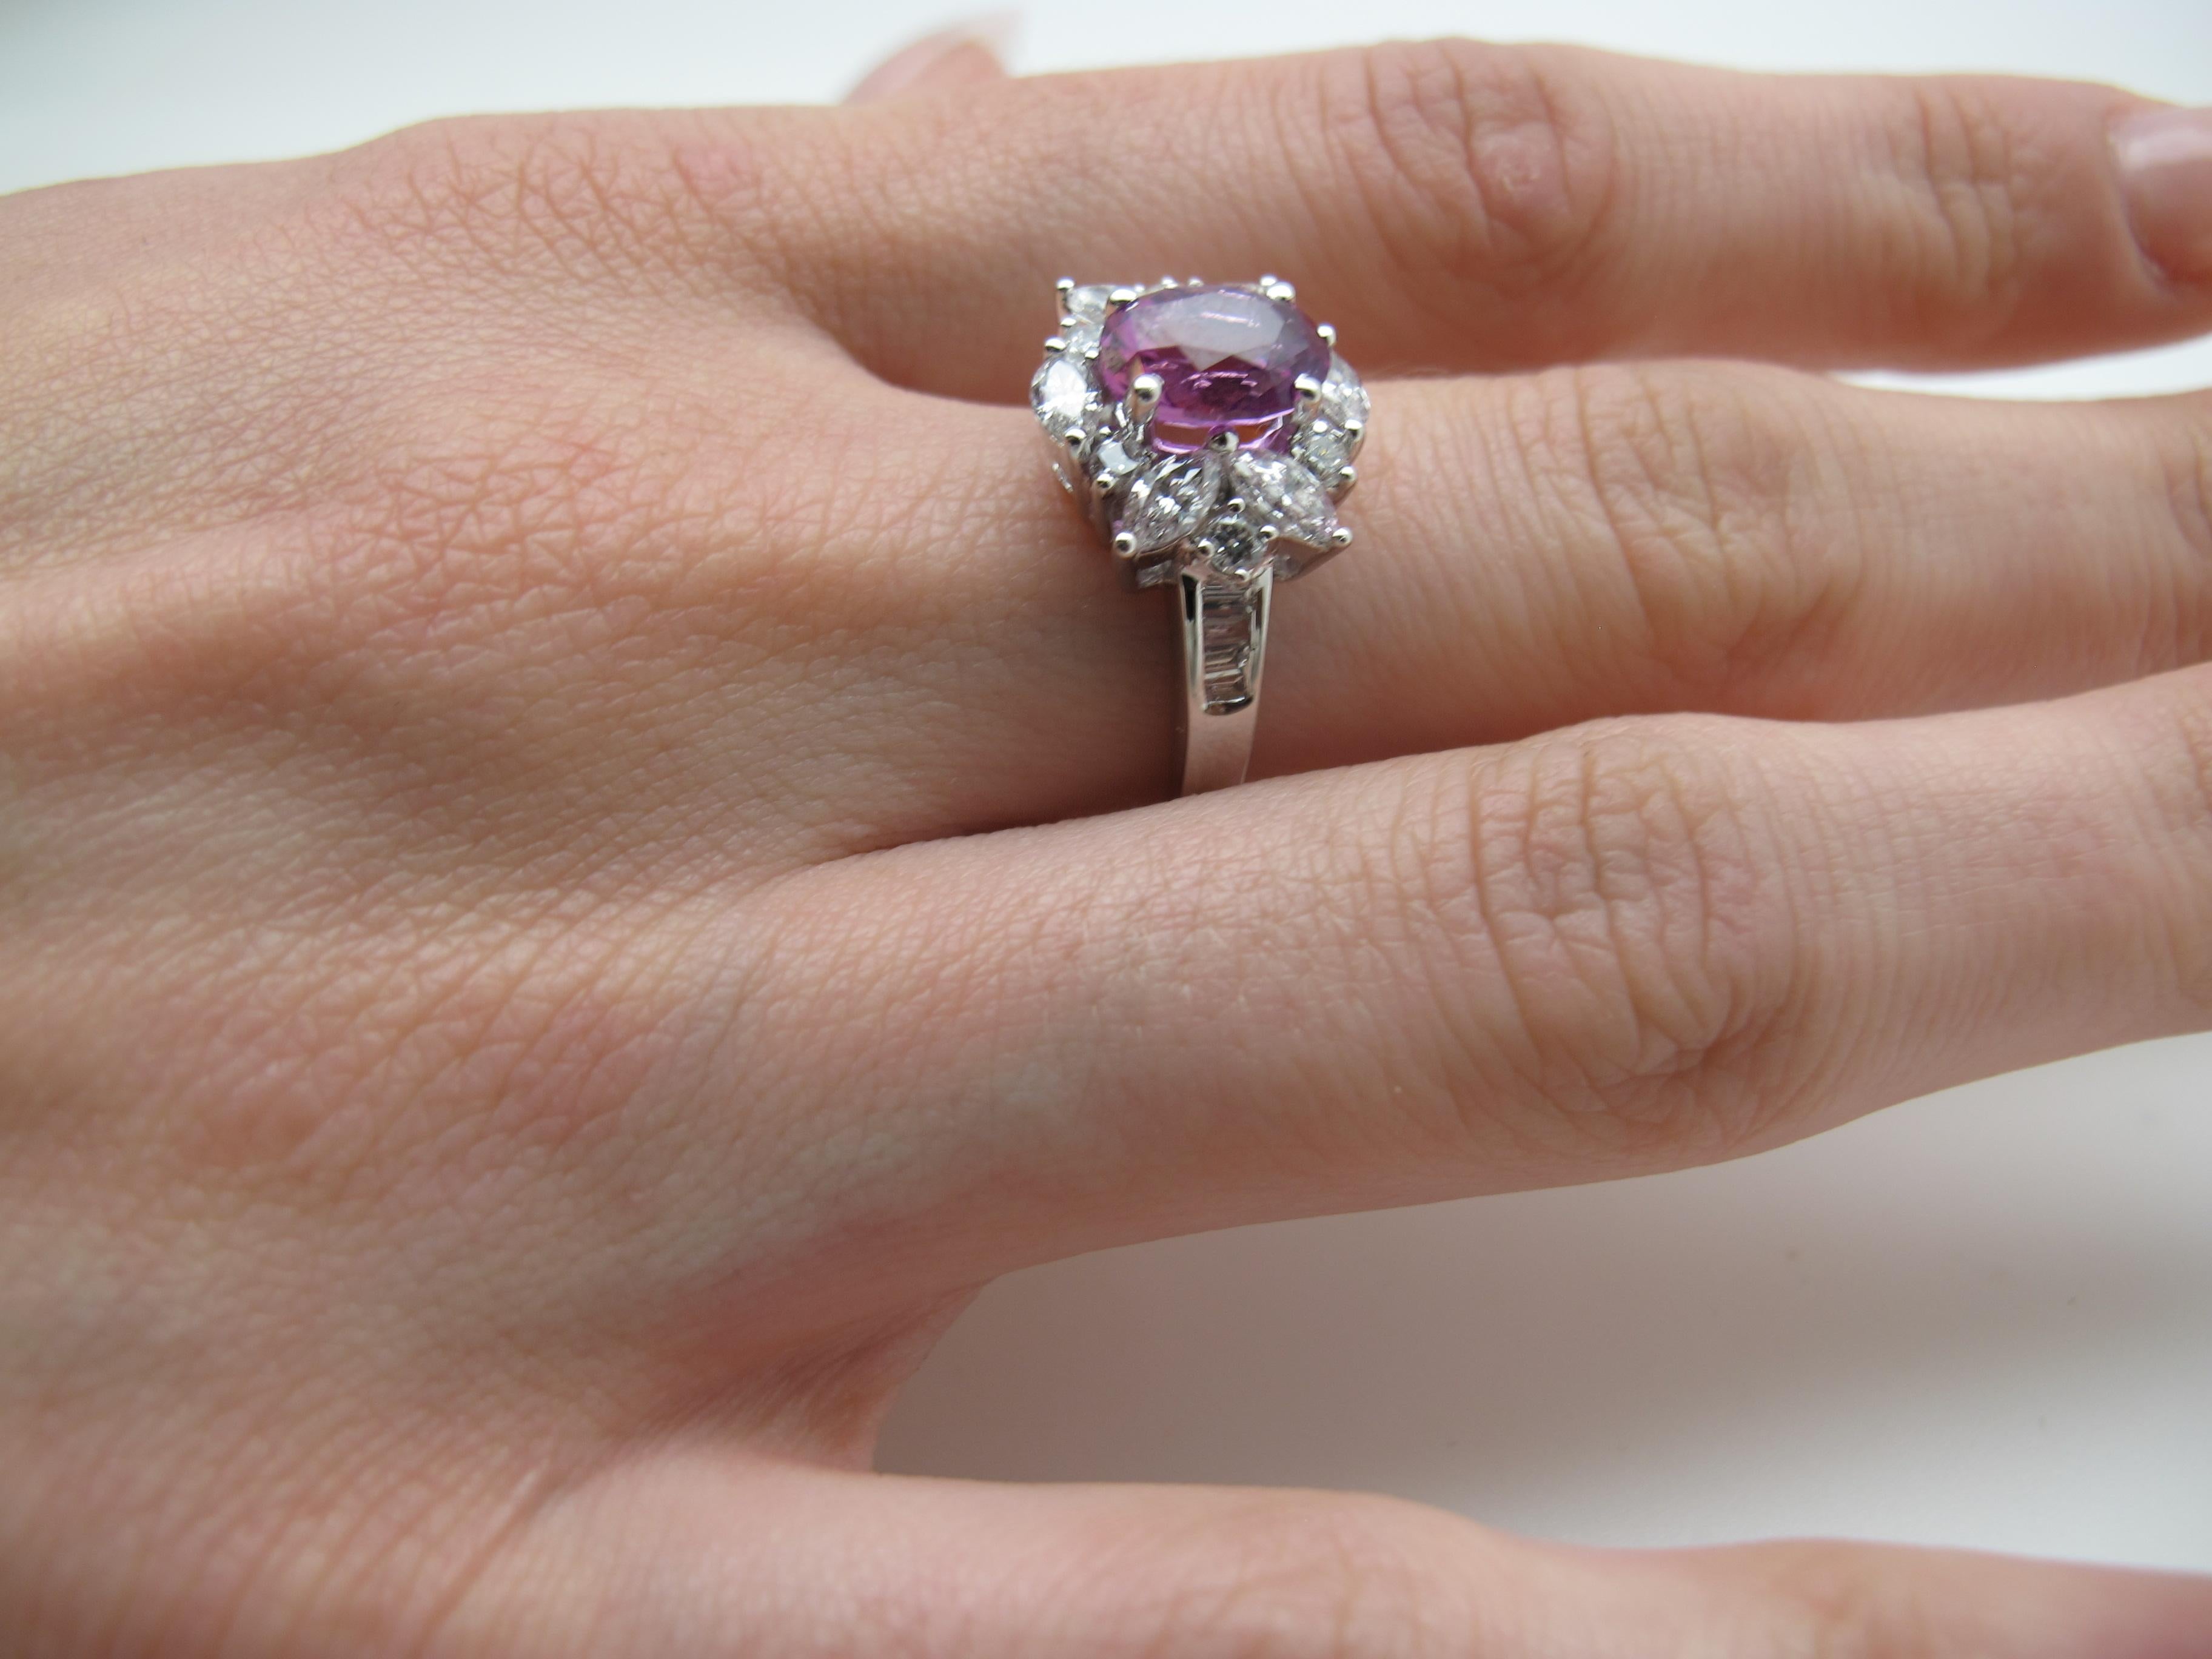 Artisan 2.27 ct. Hot Pink Sapphire Oval, Diamond Marquise 18k White Gold Cocktail Ring